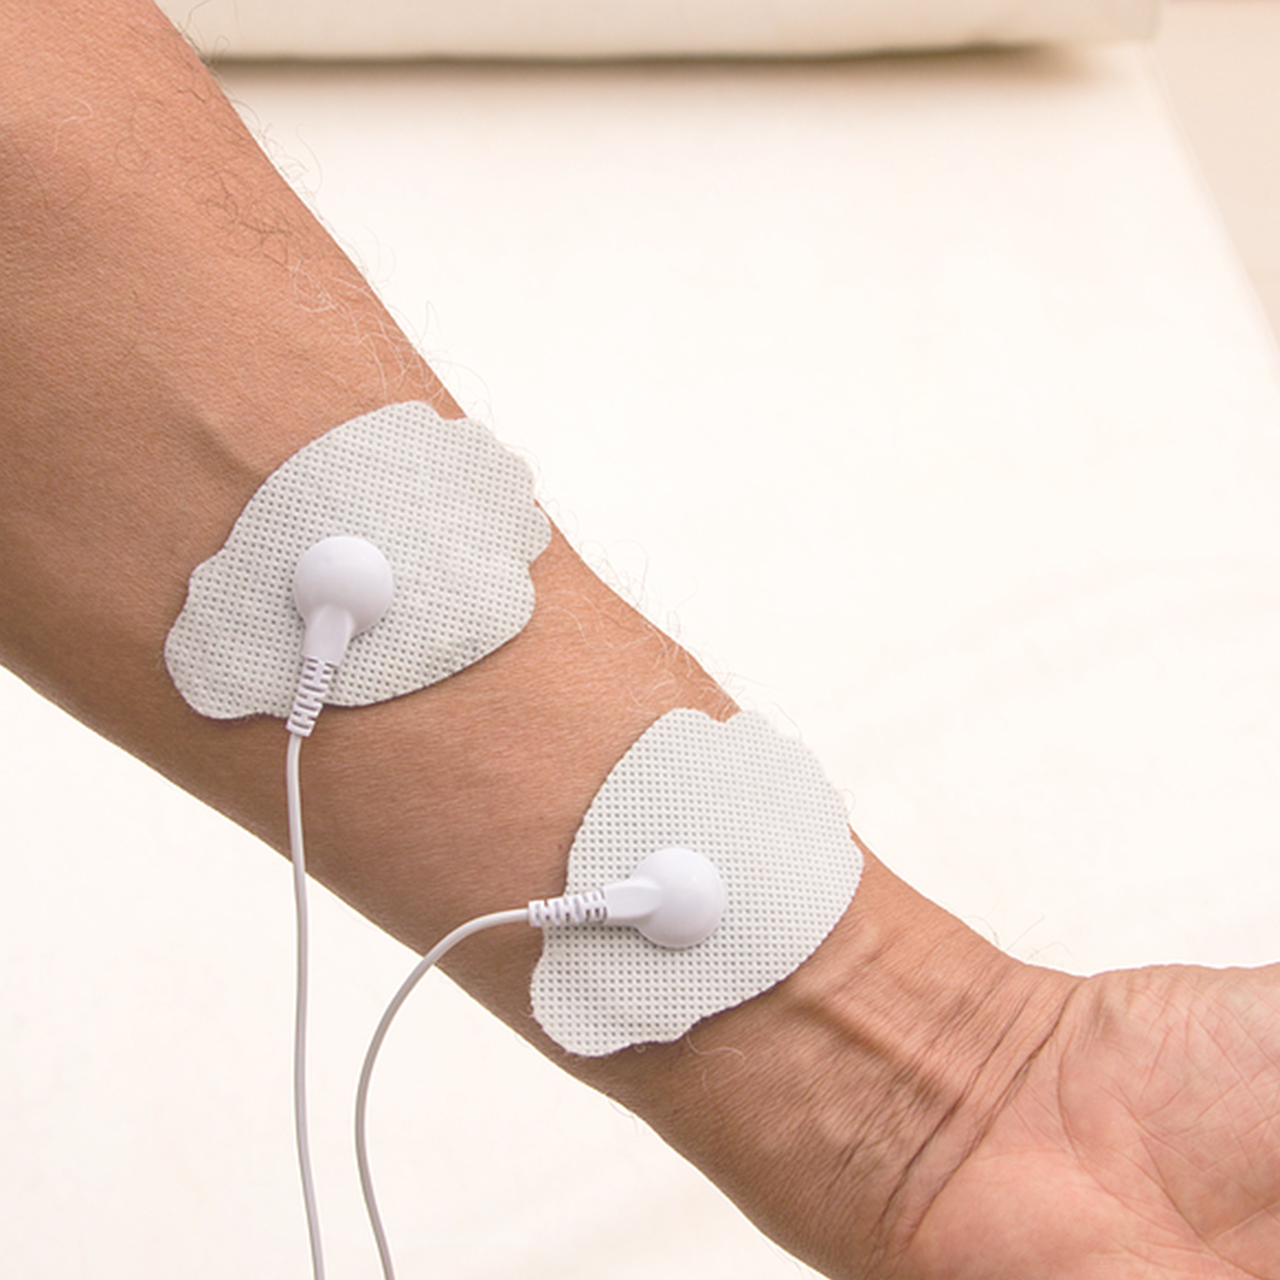 Tens unit pads on forearm